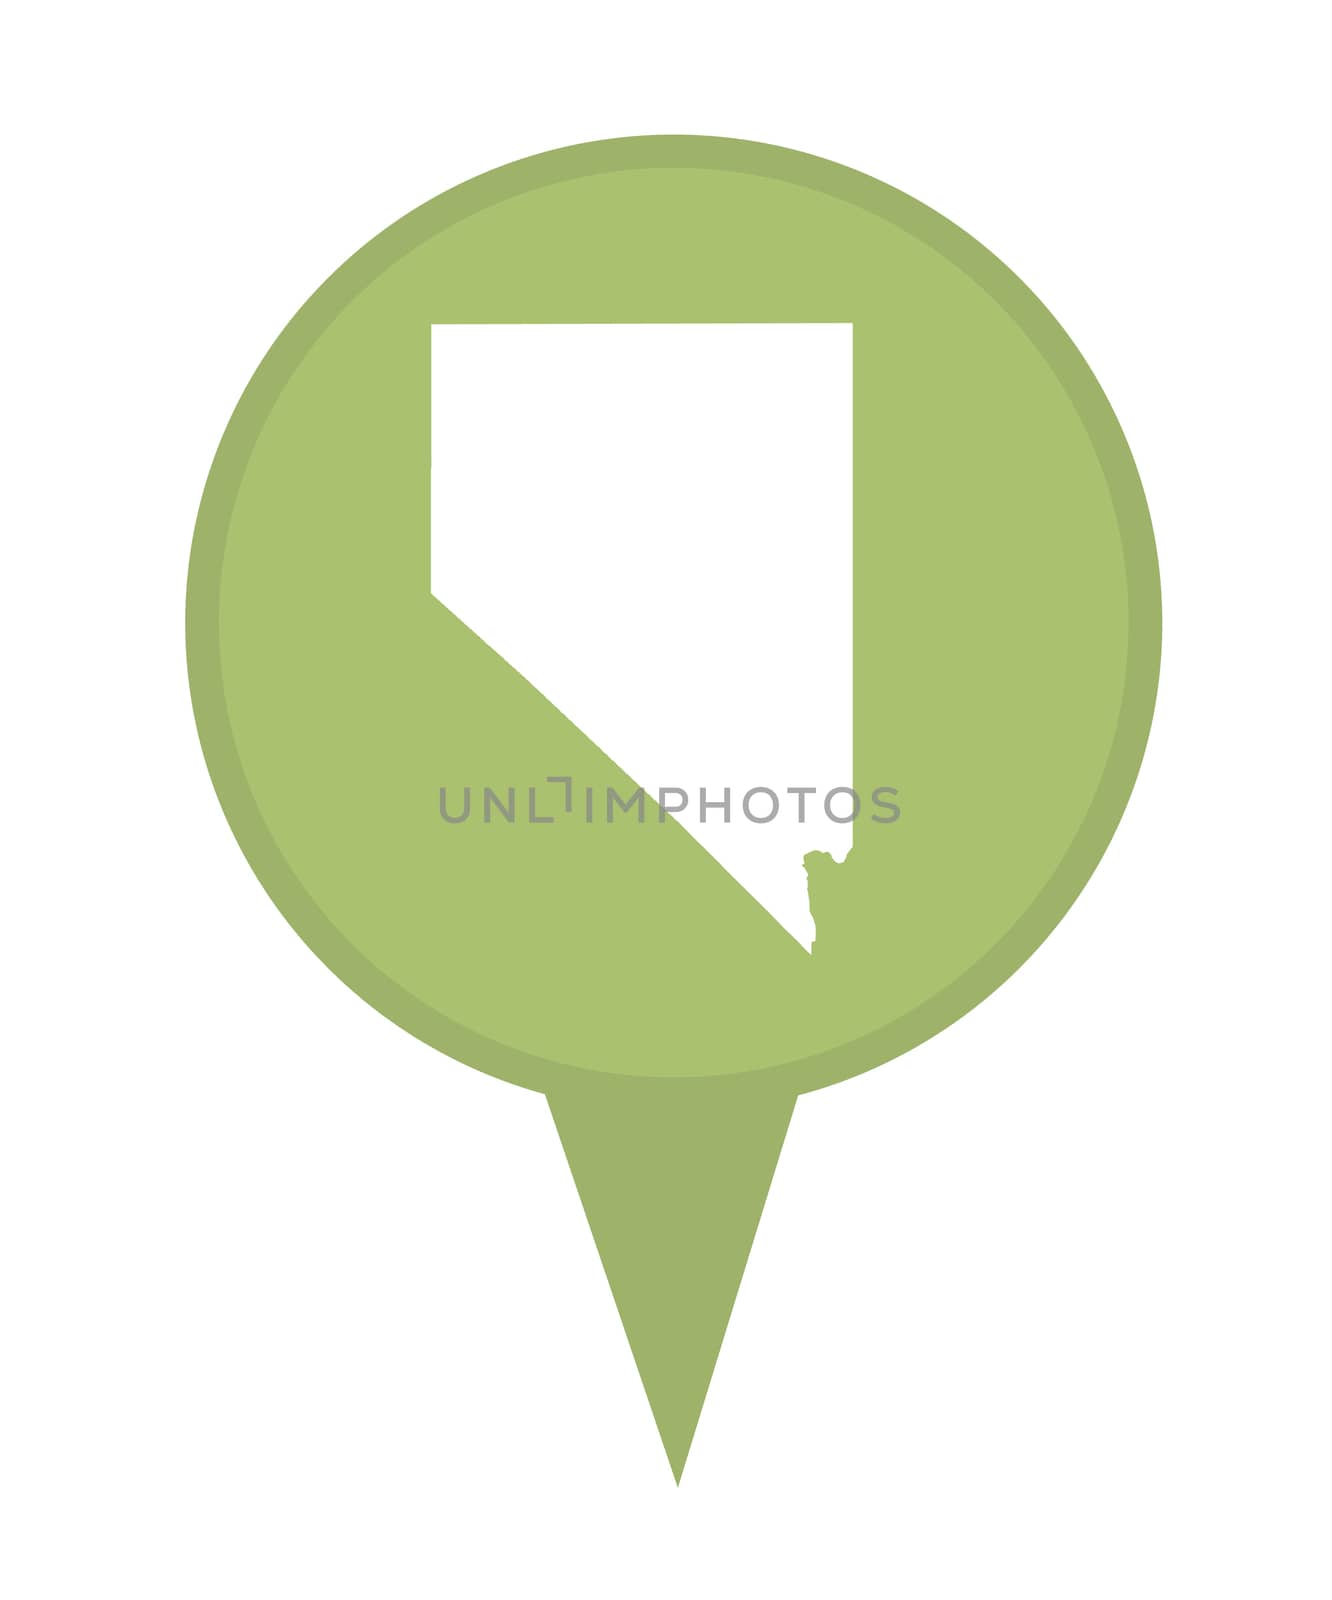 American state of Nevada marker pin isolated on a white background.